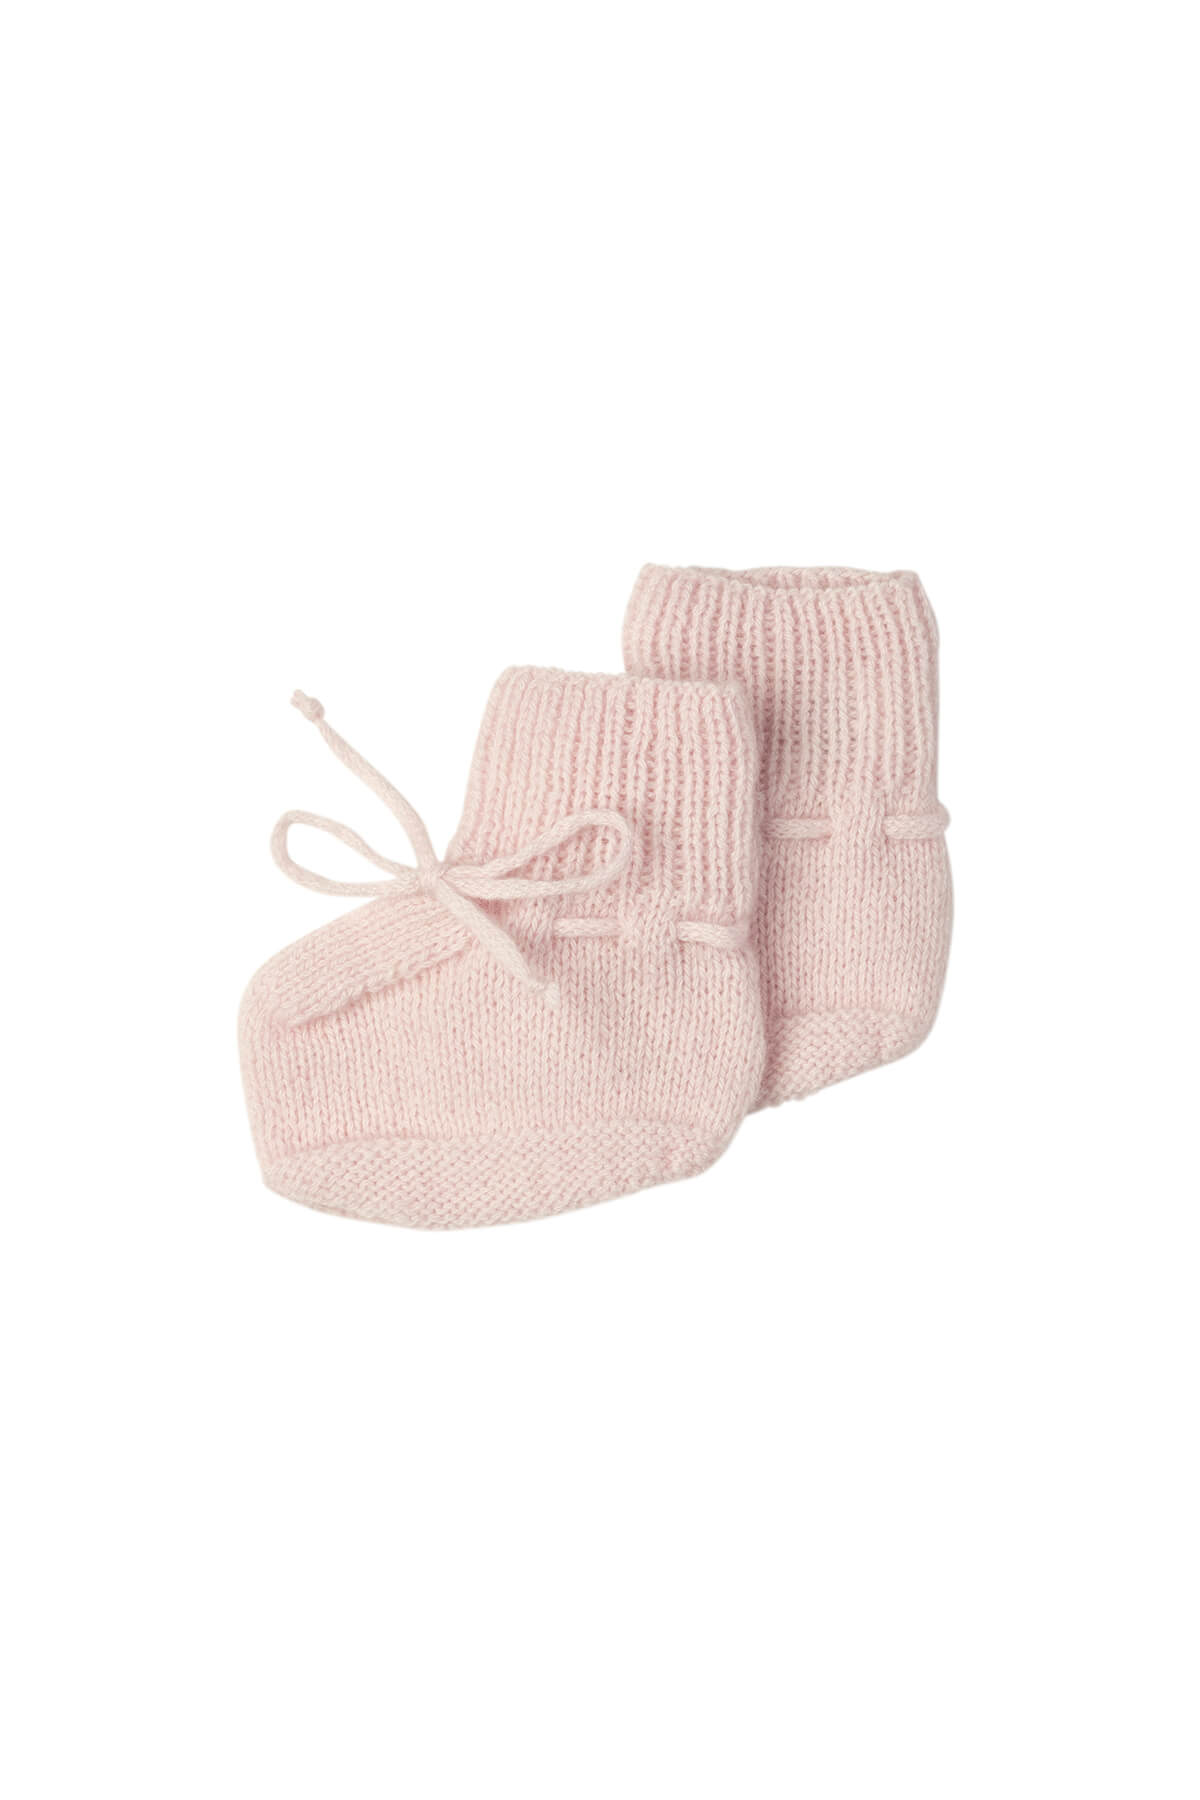 Johnstons of Elgin Hand Knitted Cashmere Baby Booties in Blush on white background 61711P191ONE